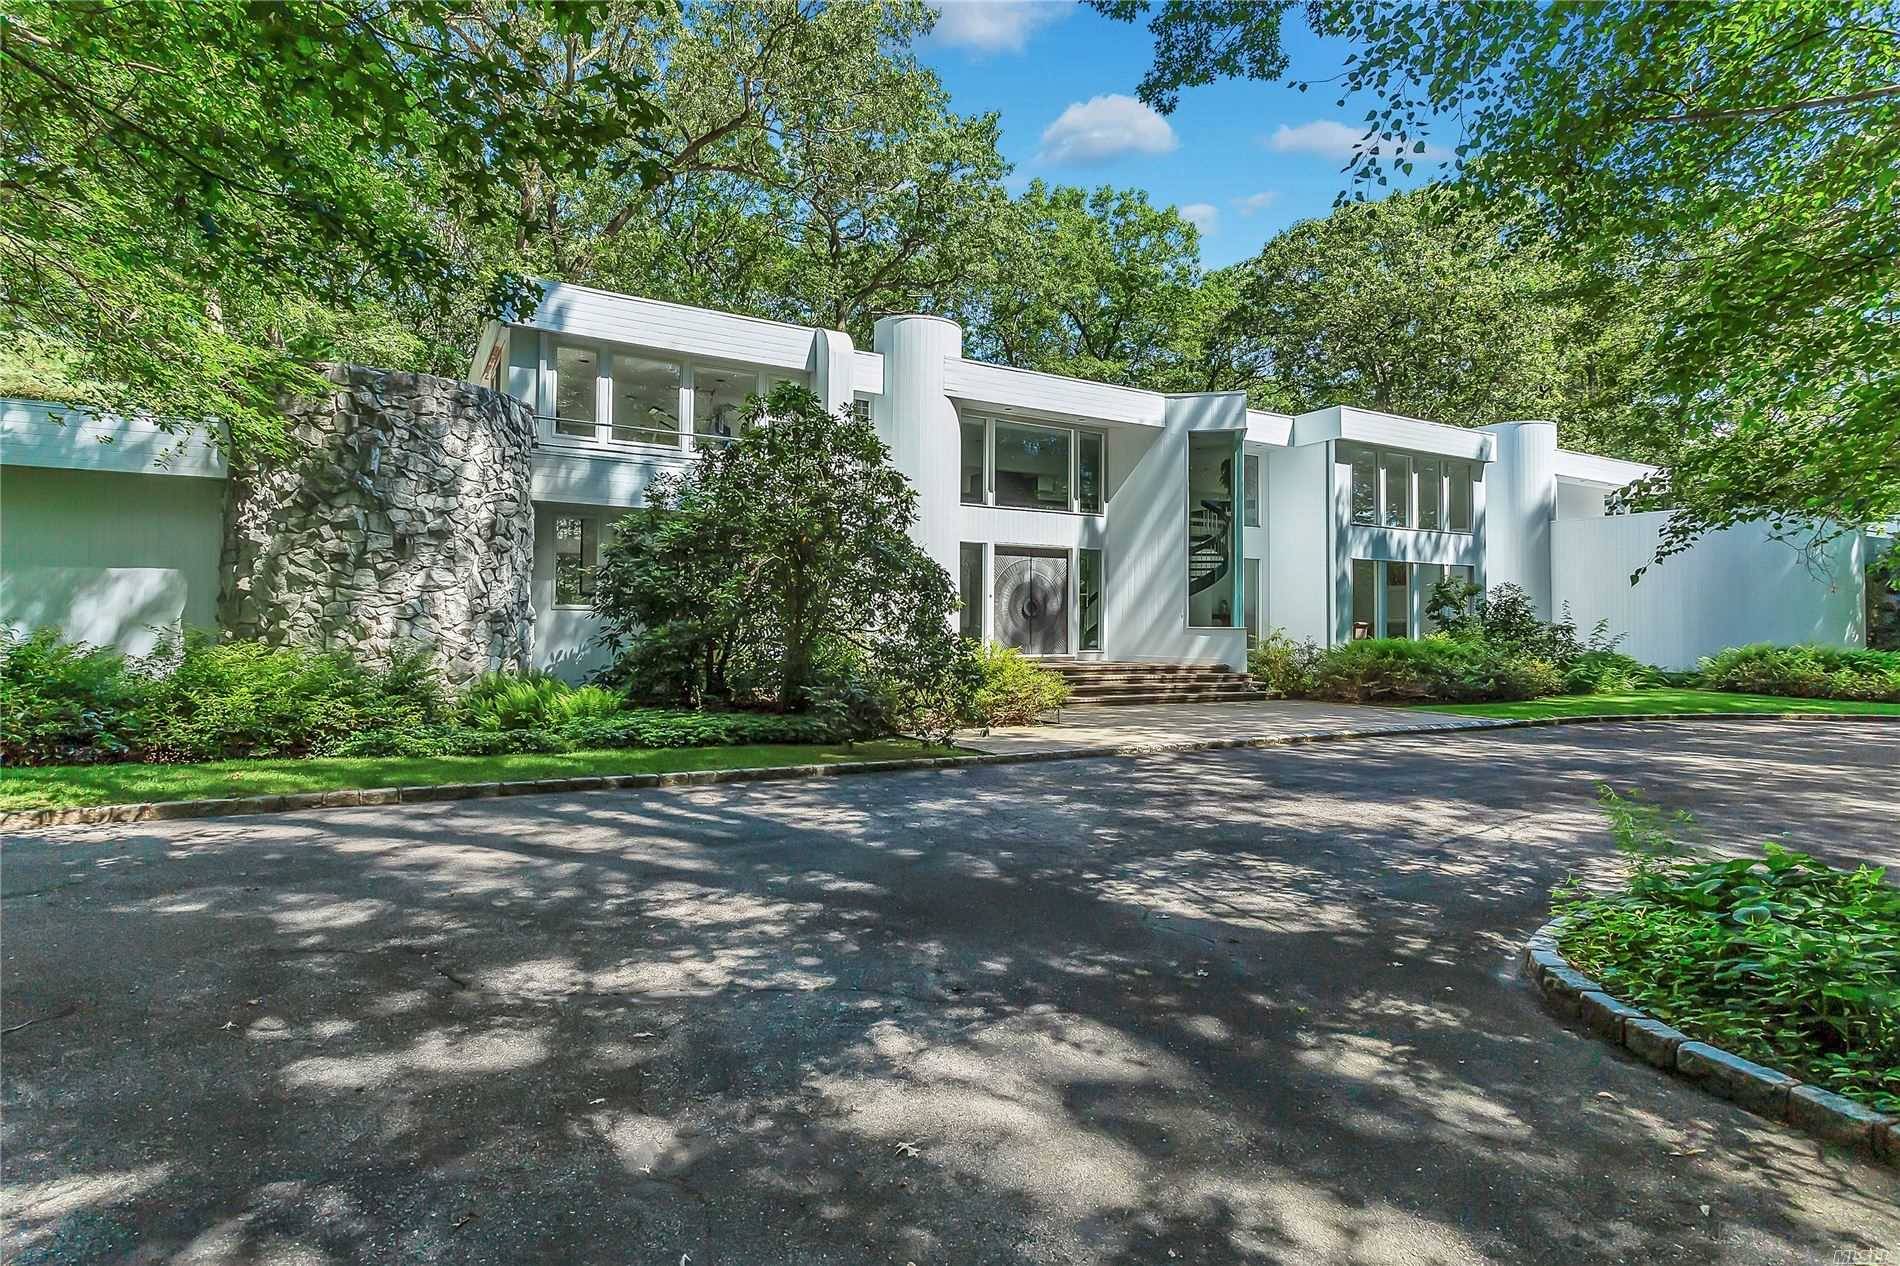 As original owners of this striking Modern home built in 1989, these sellers were ahead of their time w large white marble tiled flooring, floor to ceiling granite fpl, custom ...